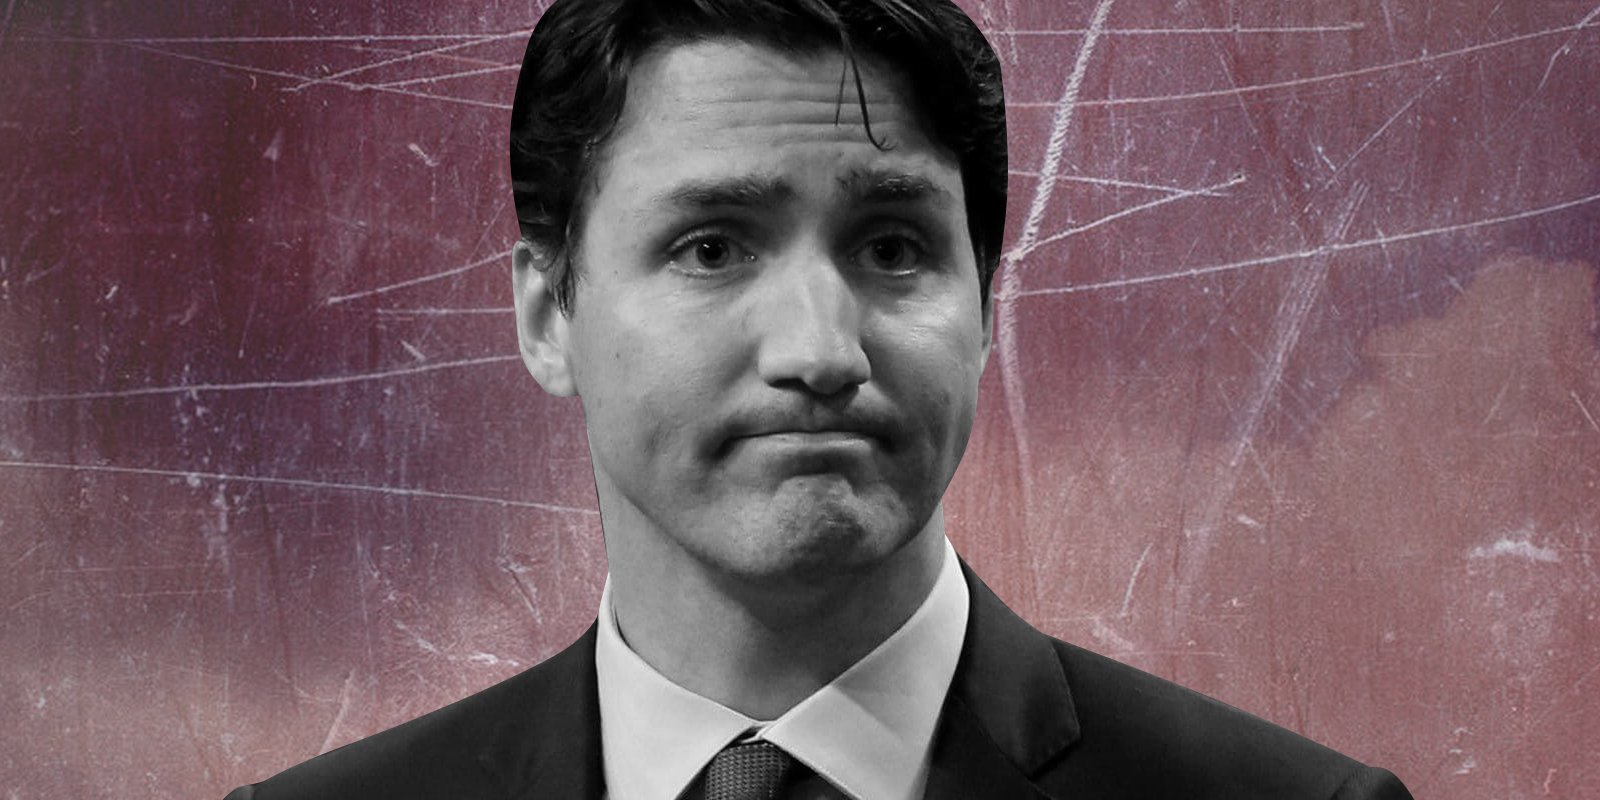 Trudeau is acting more like a dictator every day